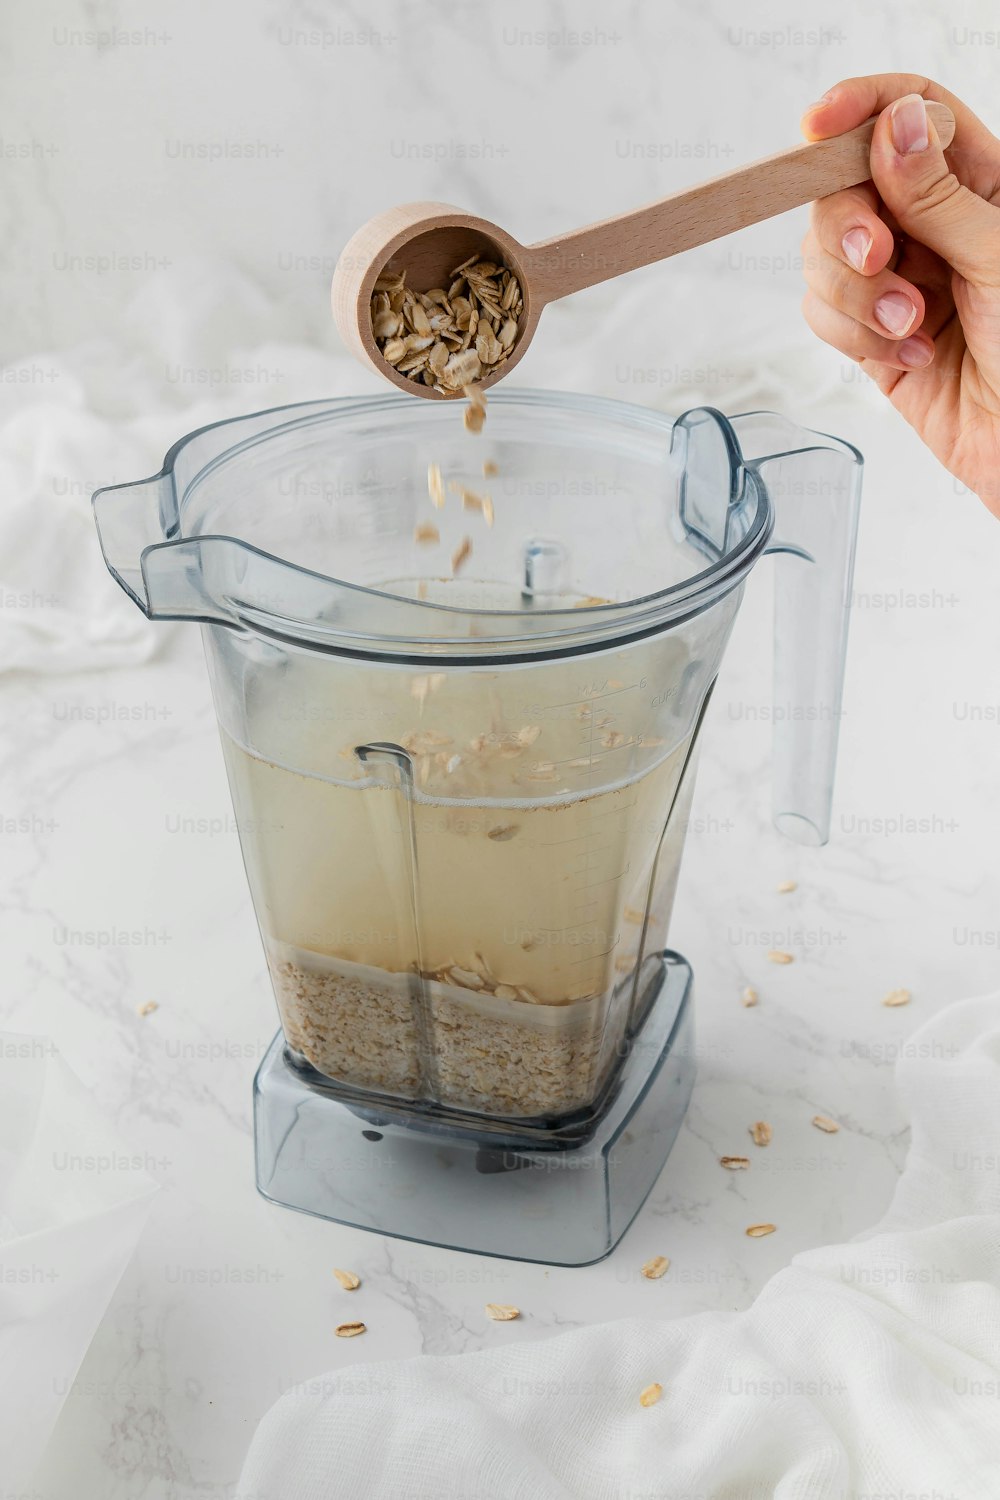 a blender filled with oats and a wooden spoon